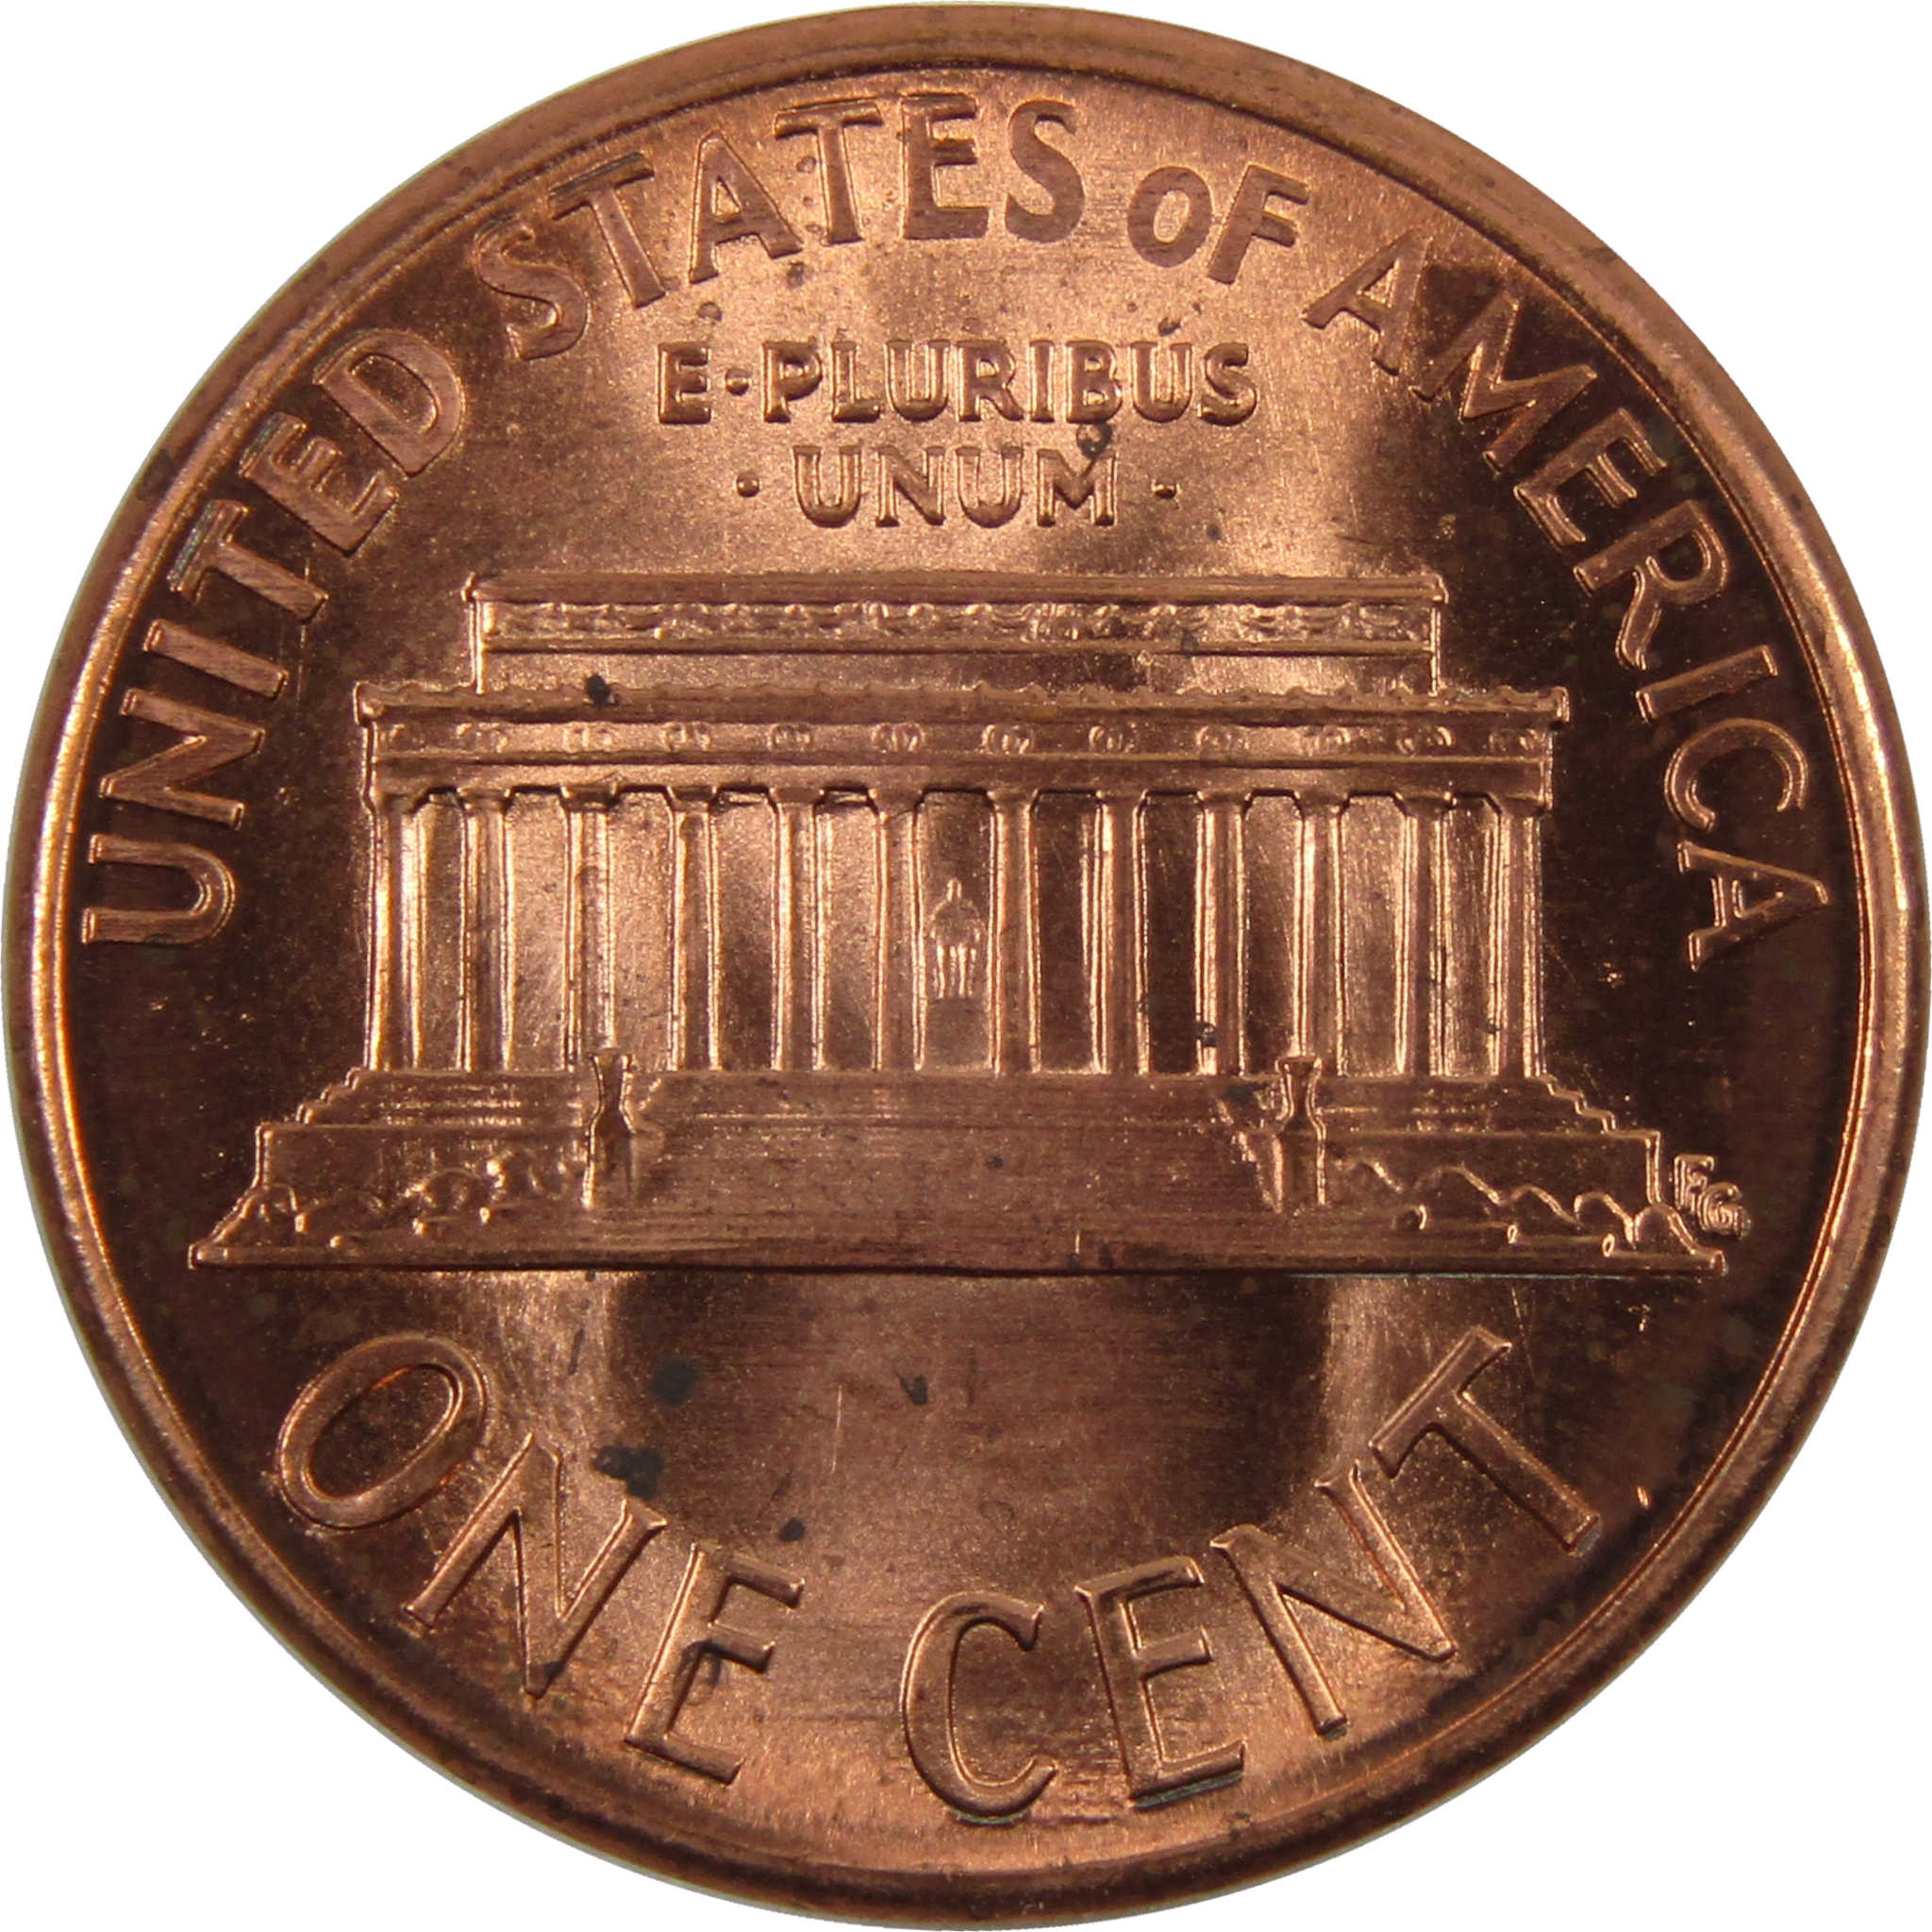 1990 Lincoln Memorial Cent BU Uncirculated Penny 1c Coin